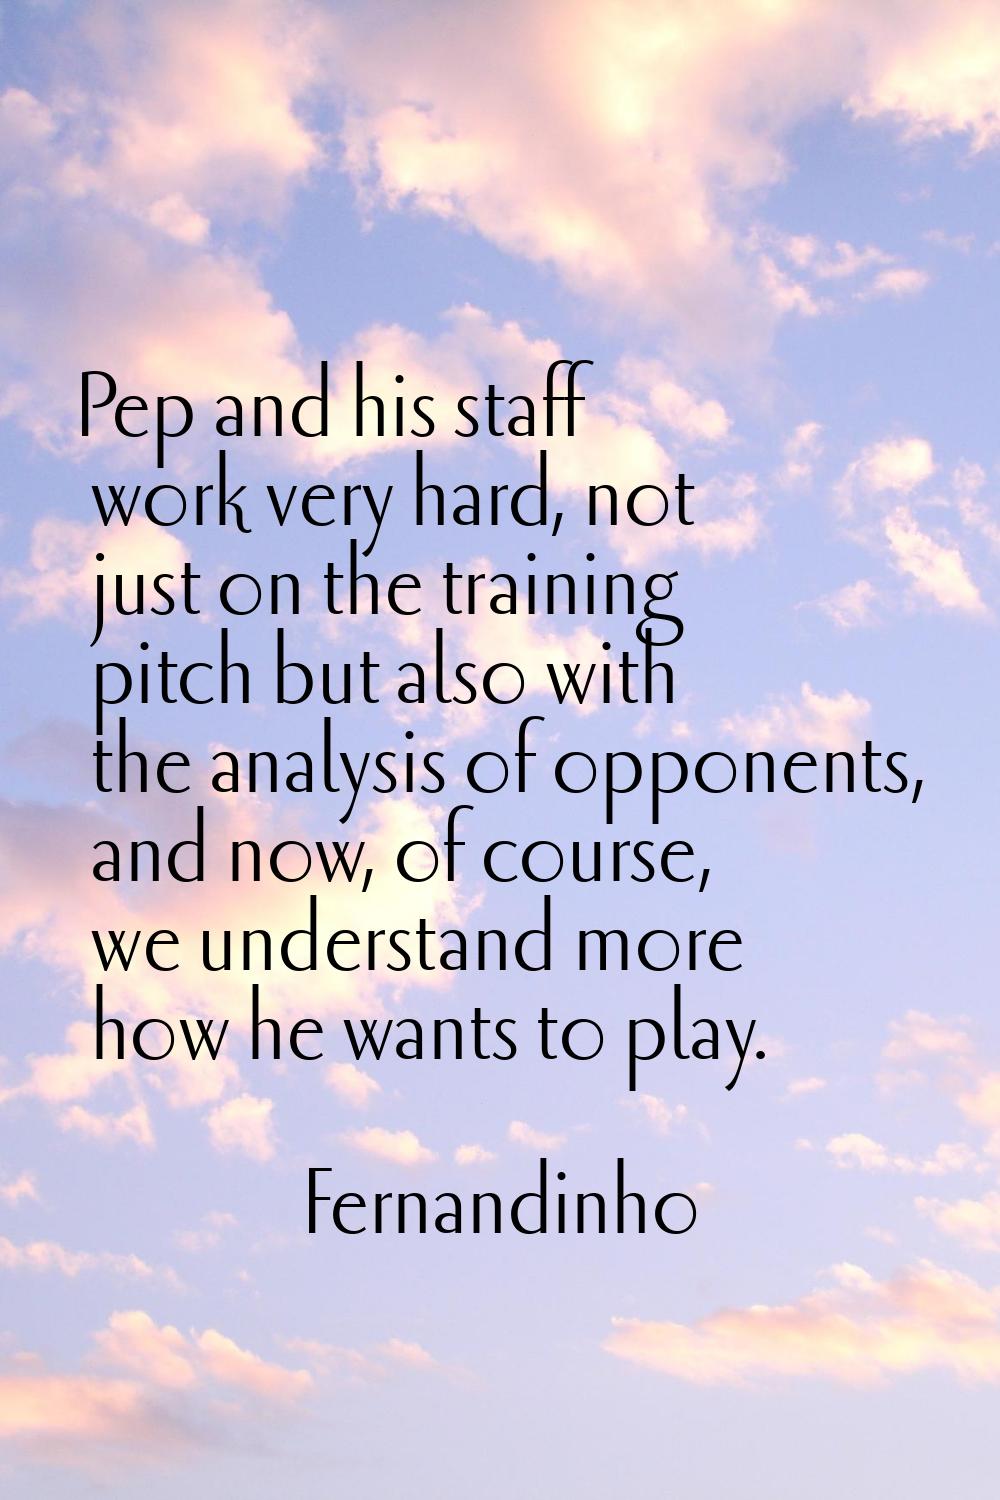 Pep and his staff work very hard, not just on the training pitch but also with the analysis of oppo